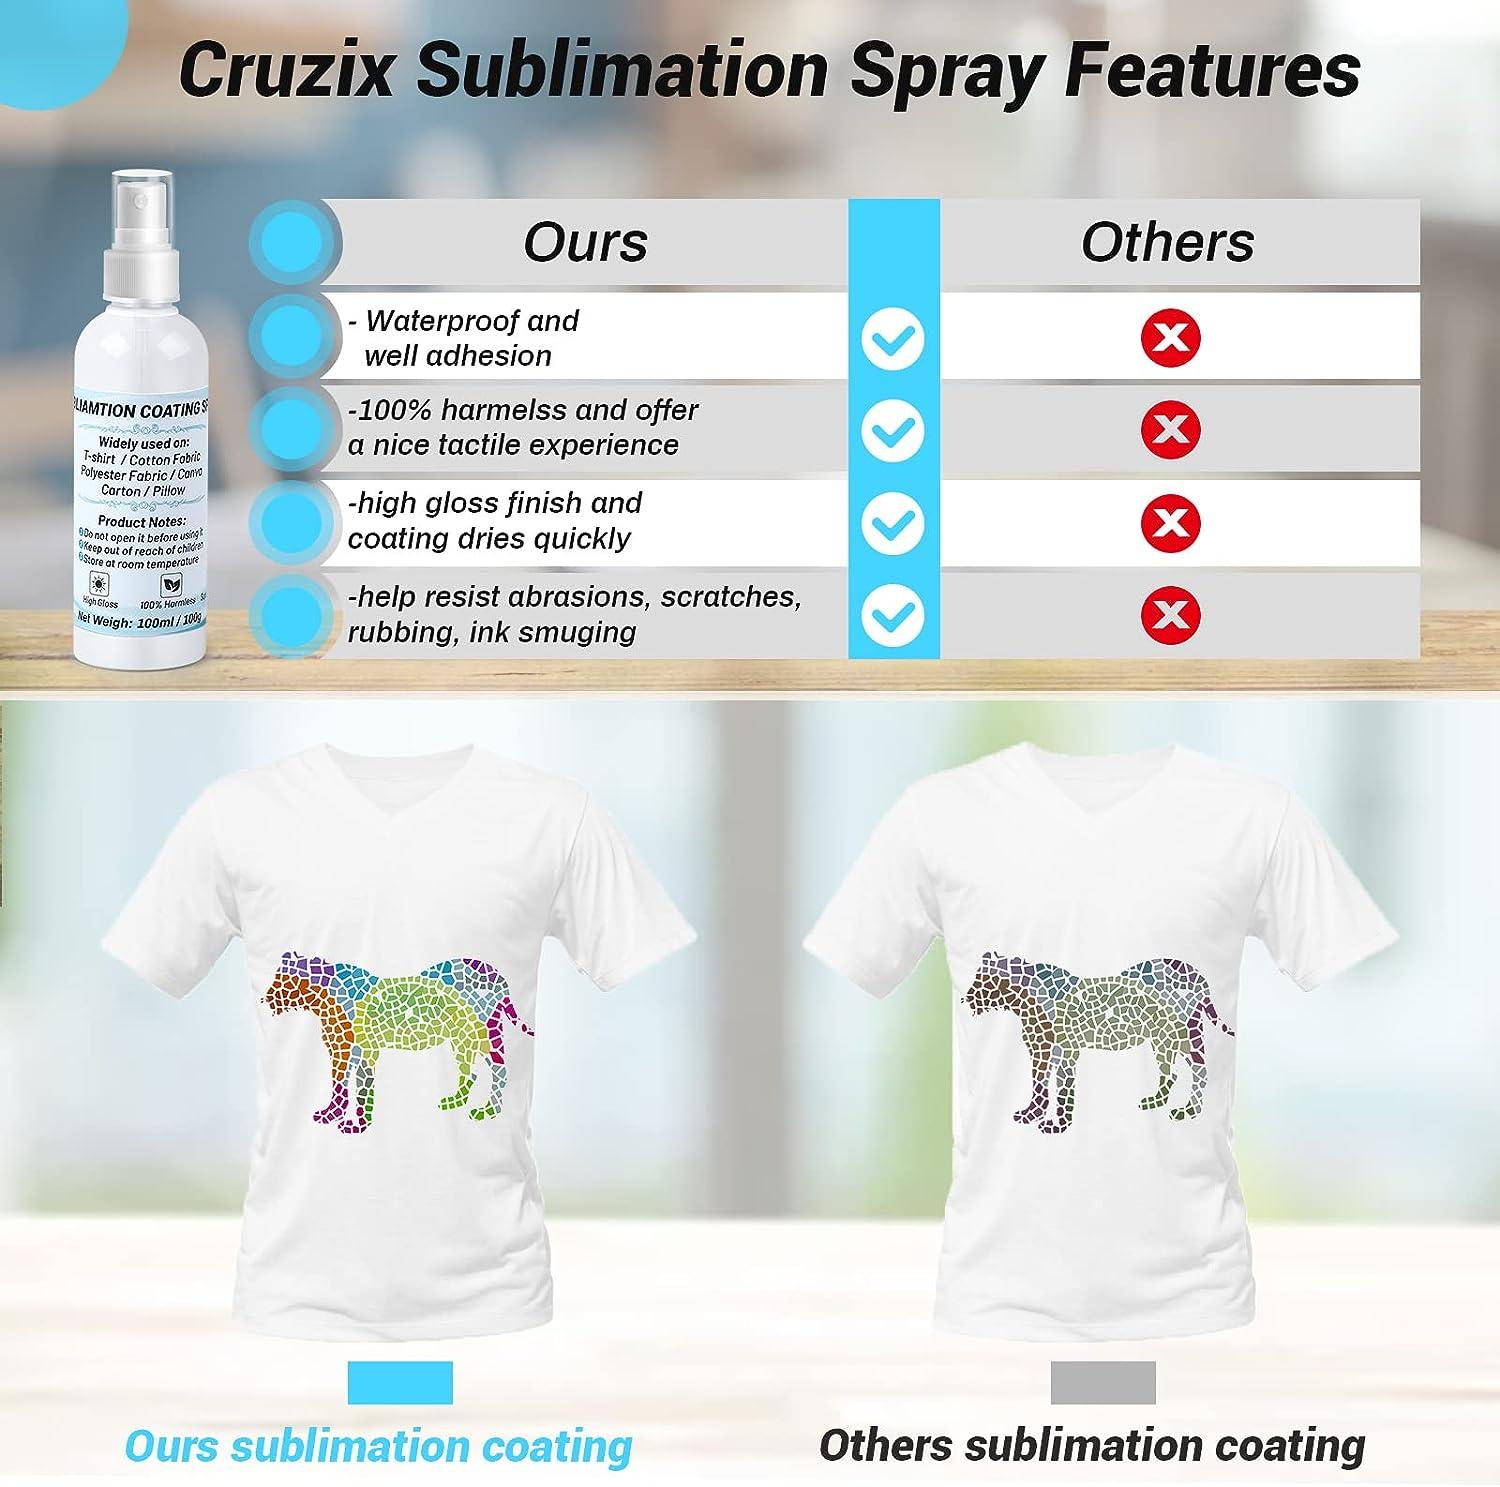 Sublimation spray for cotton fabrics. For every cup of water you